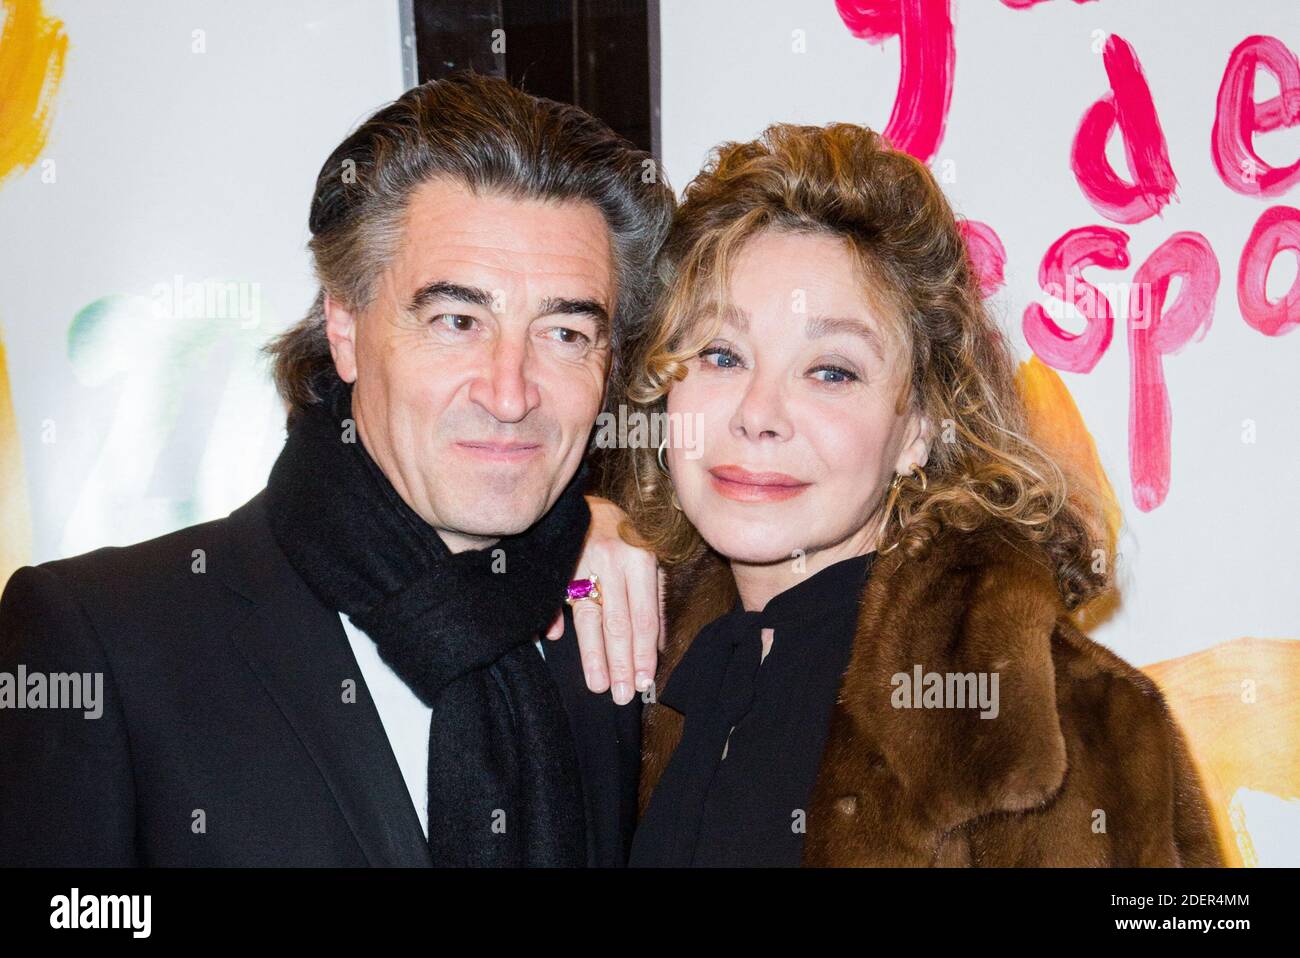 Grace de Capitani and her compagnon Jean-Pierre Jacquin during the 27th L'Espoir Gala of the Cancer League at the Champs-Elysees Theate in Paris on October 22, 2019. Photo by Nasser Berzane/ABACAPRESS.COM Stock Photo